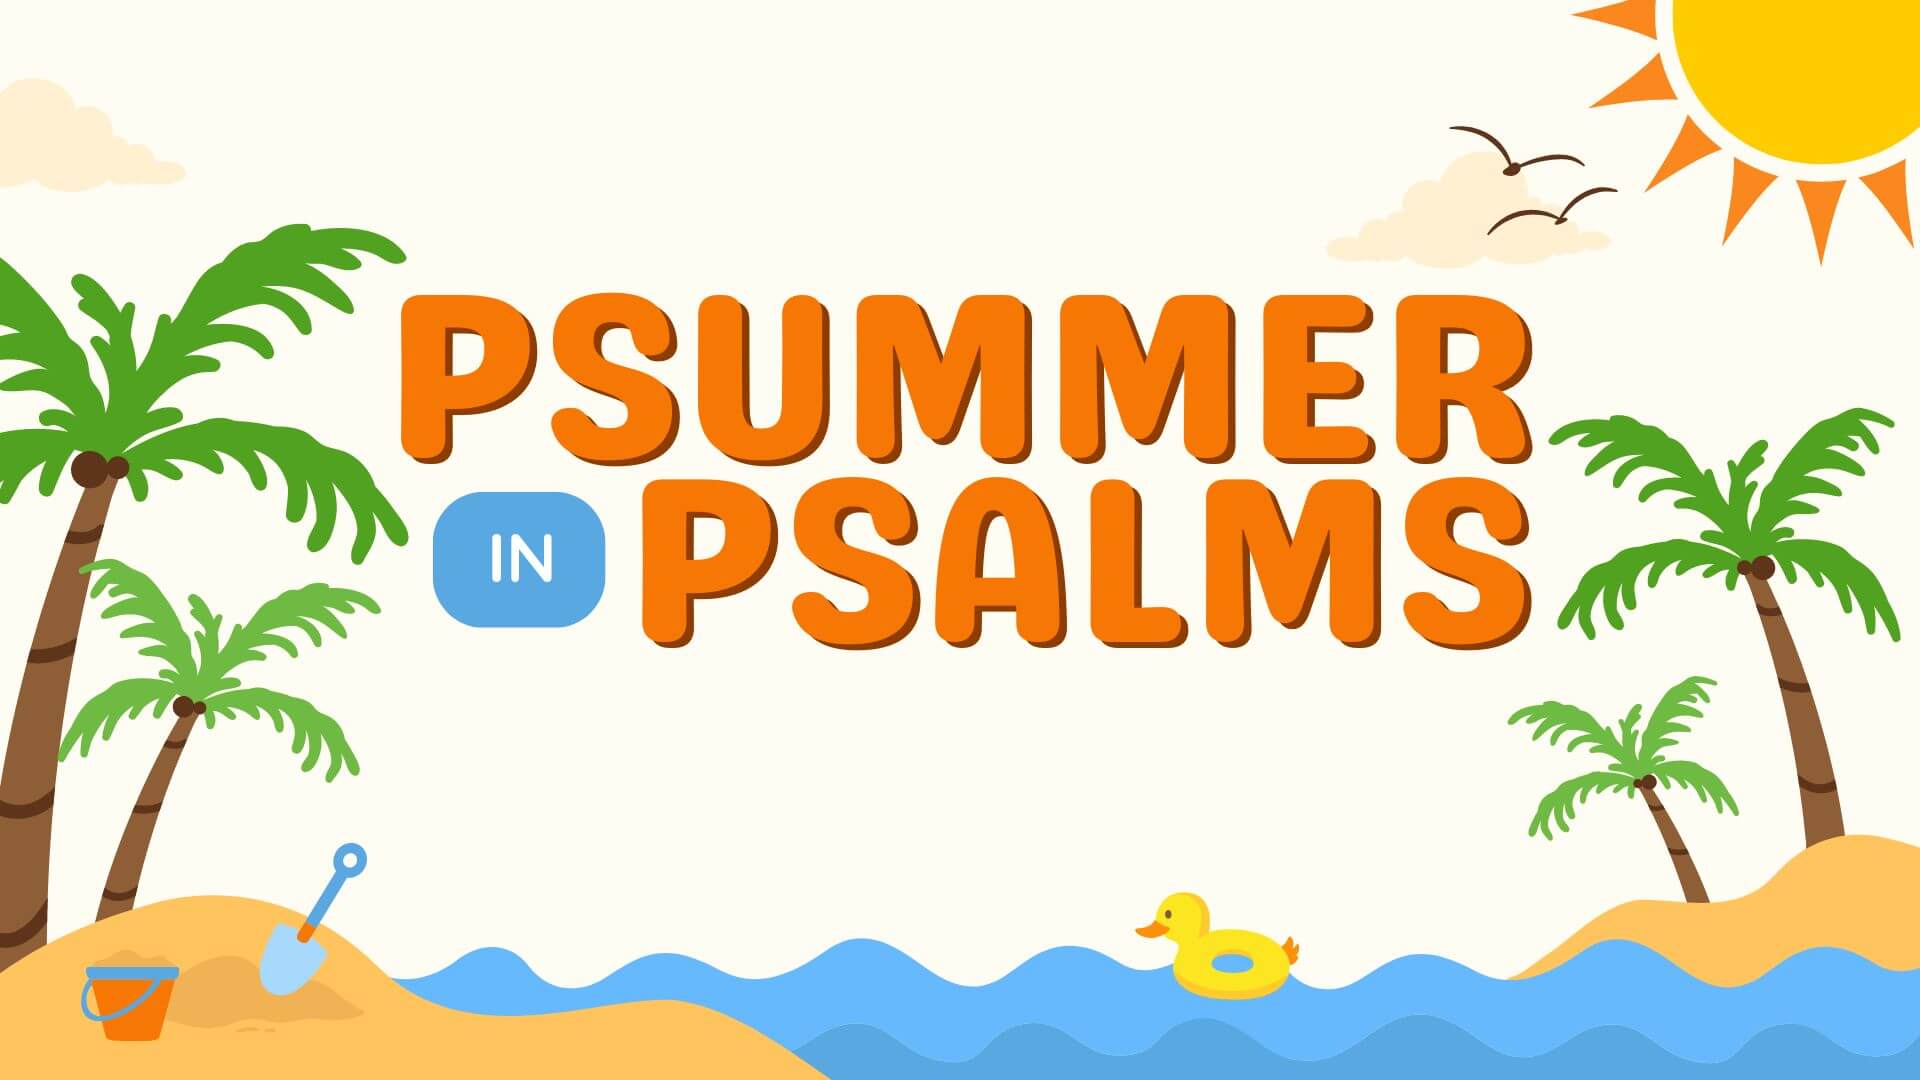 Psummer in Psalms: Power and Protection